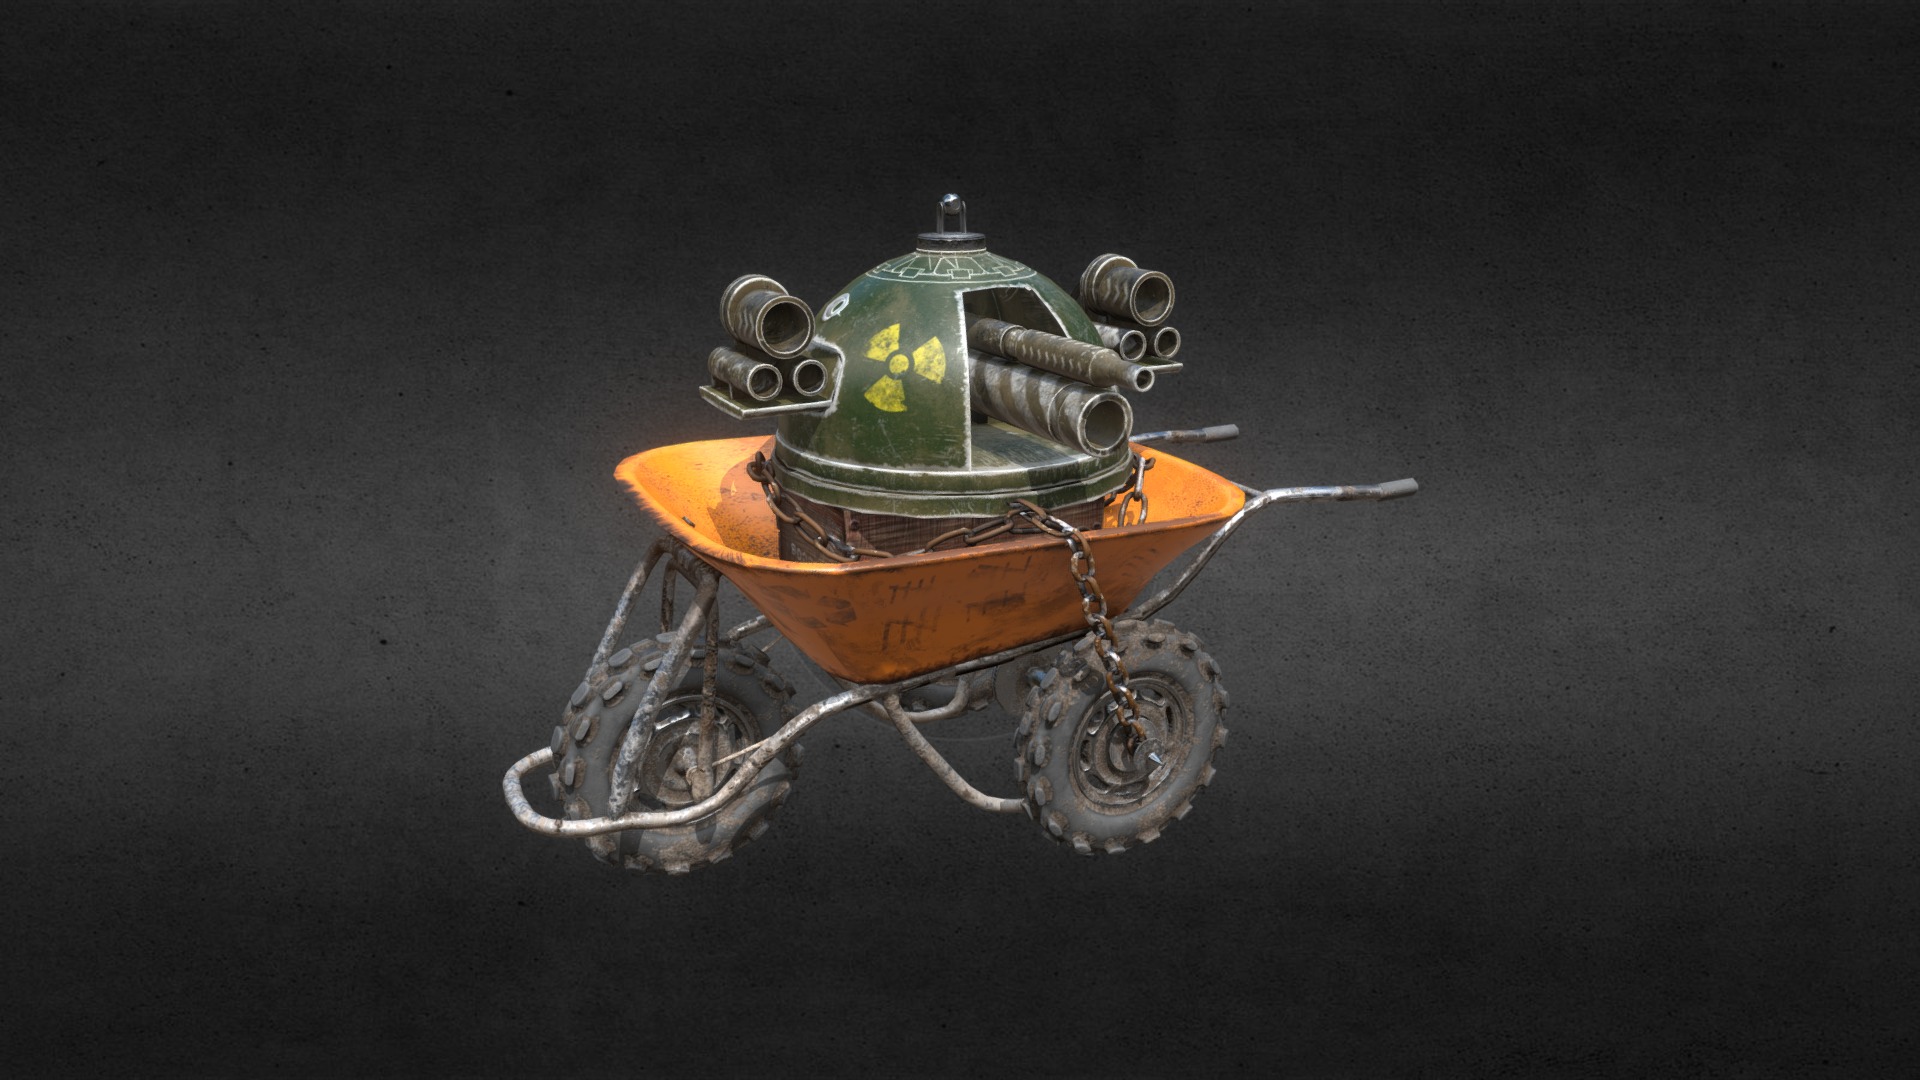 3D model Recycled Tank v1.01 - This is a 3D model of the Recycled Tank v1.01. The 3D model is about a small toy motorcycle.